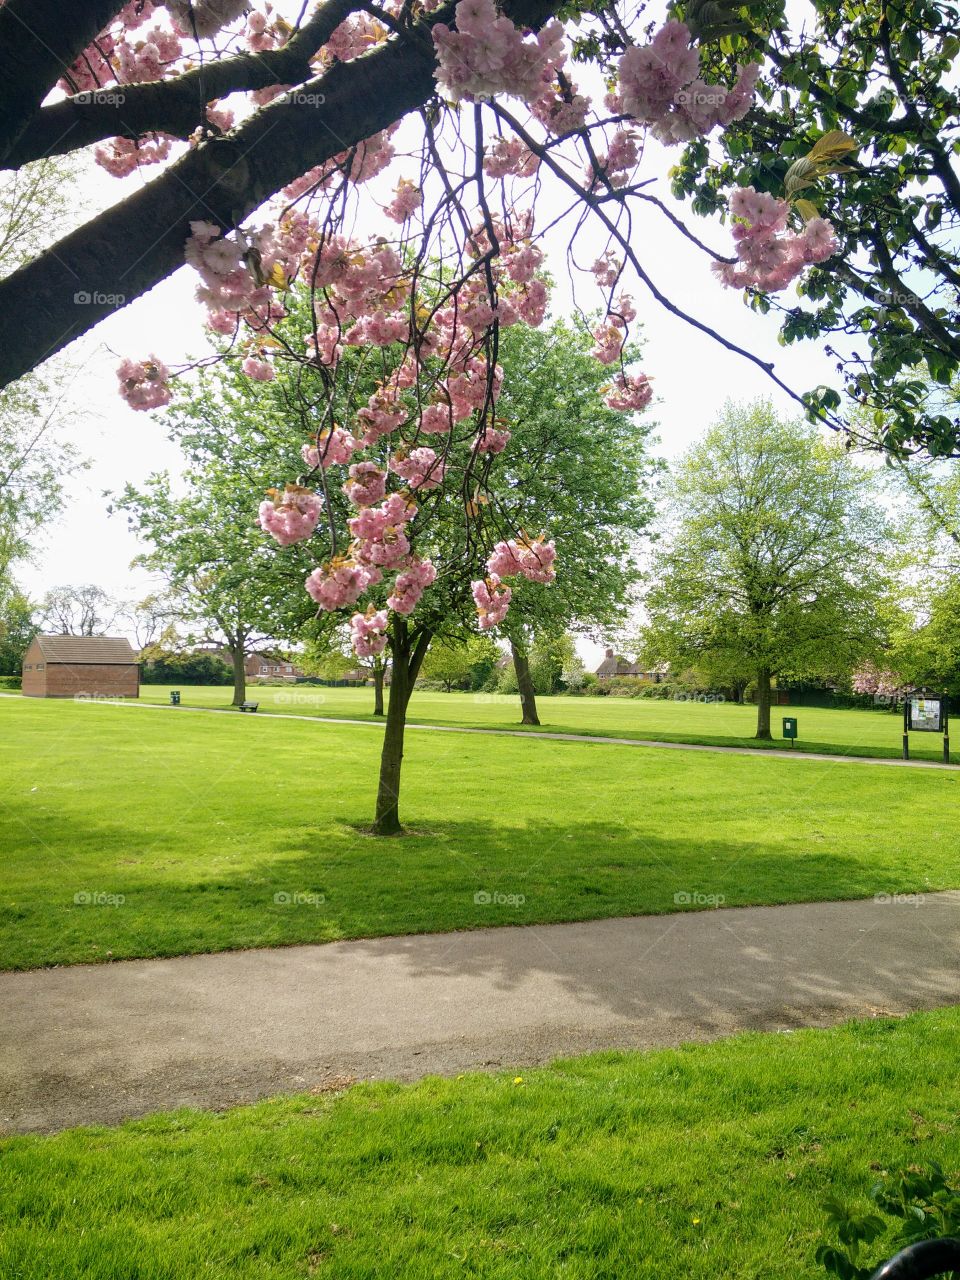 Park nature green space with trees, path and pink blossom in foregroud